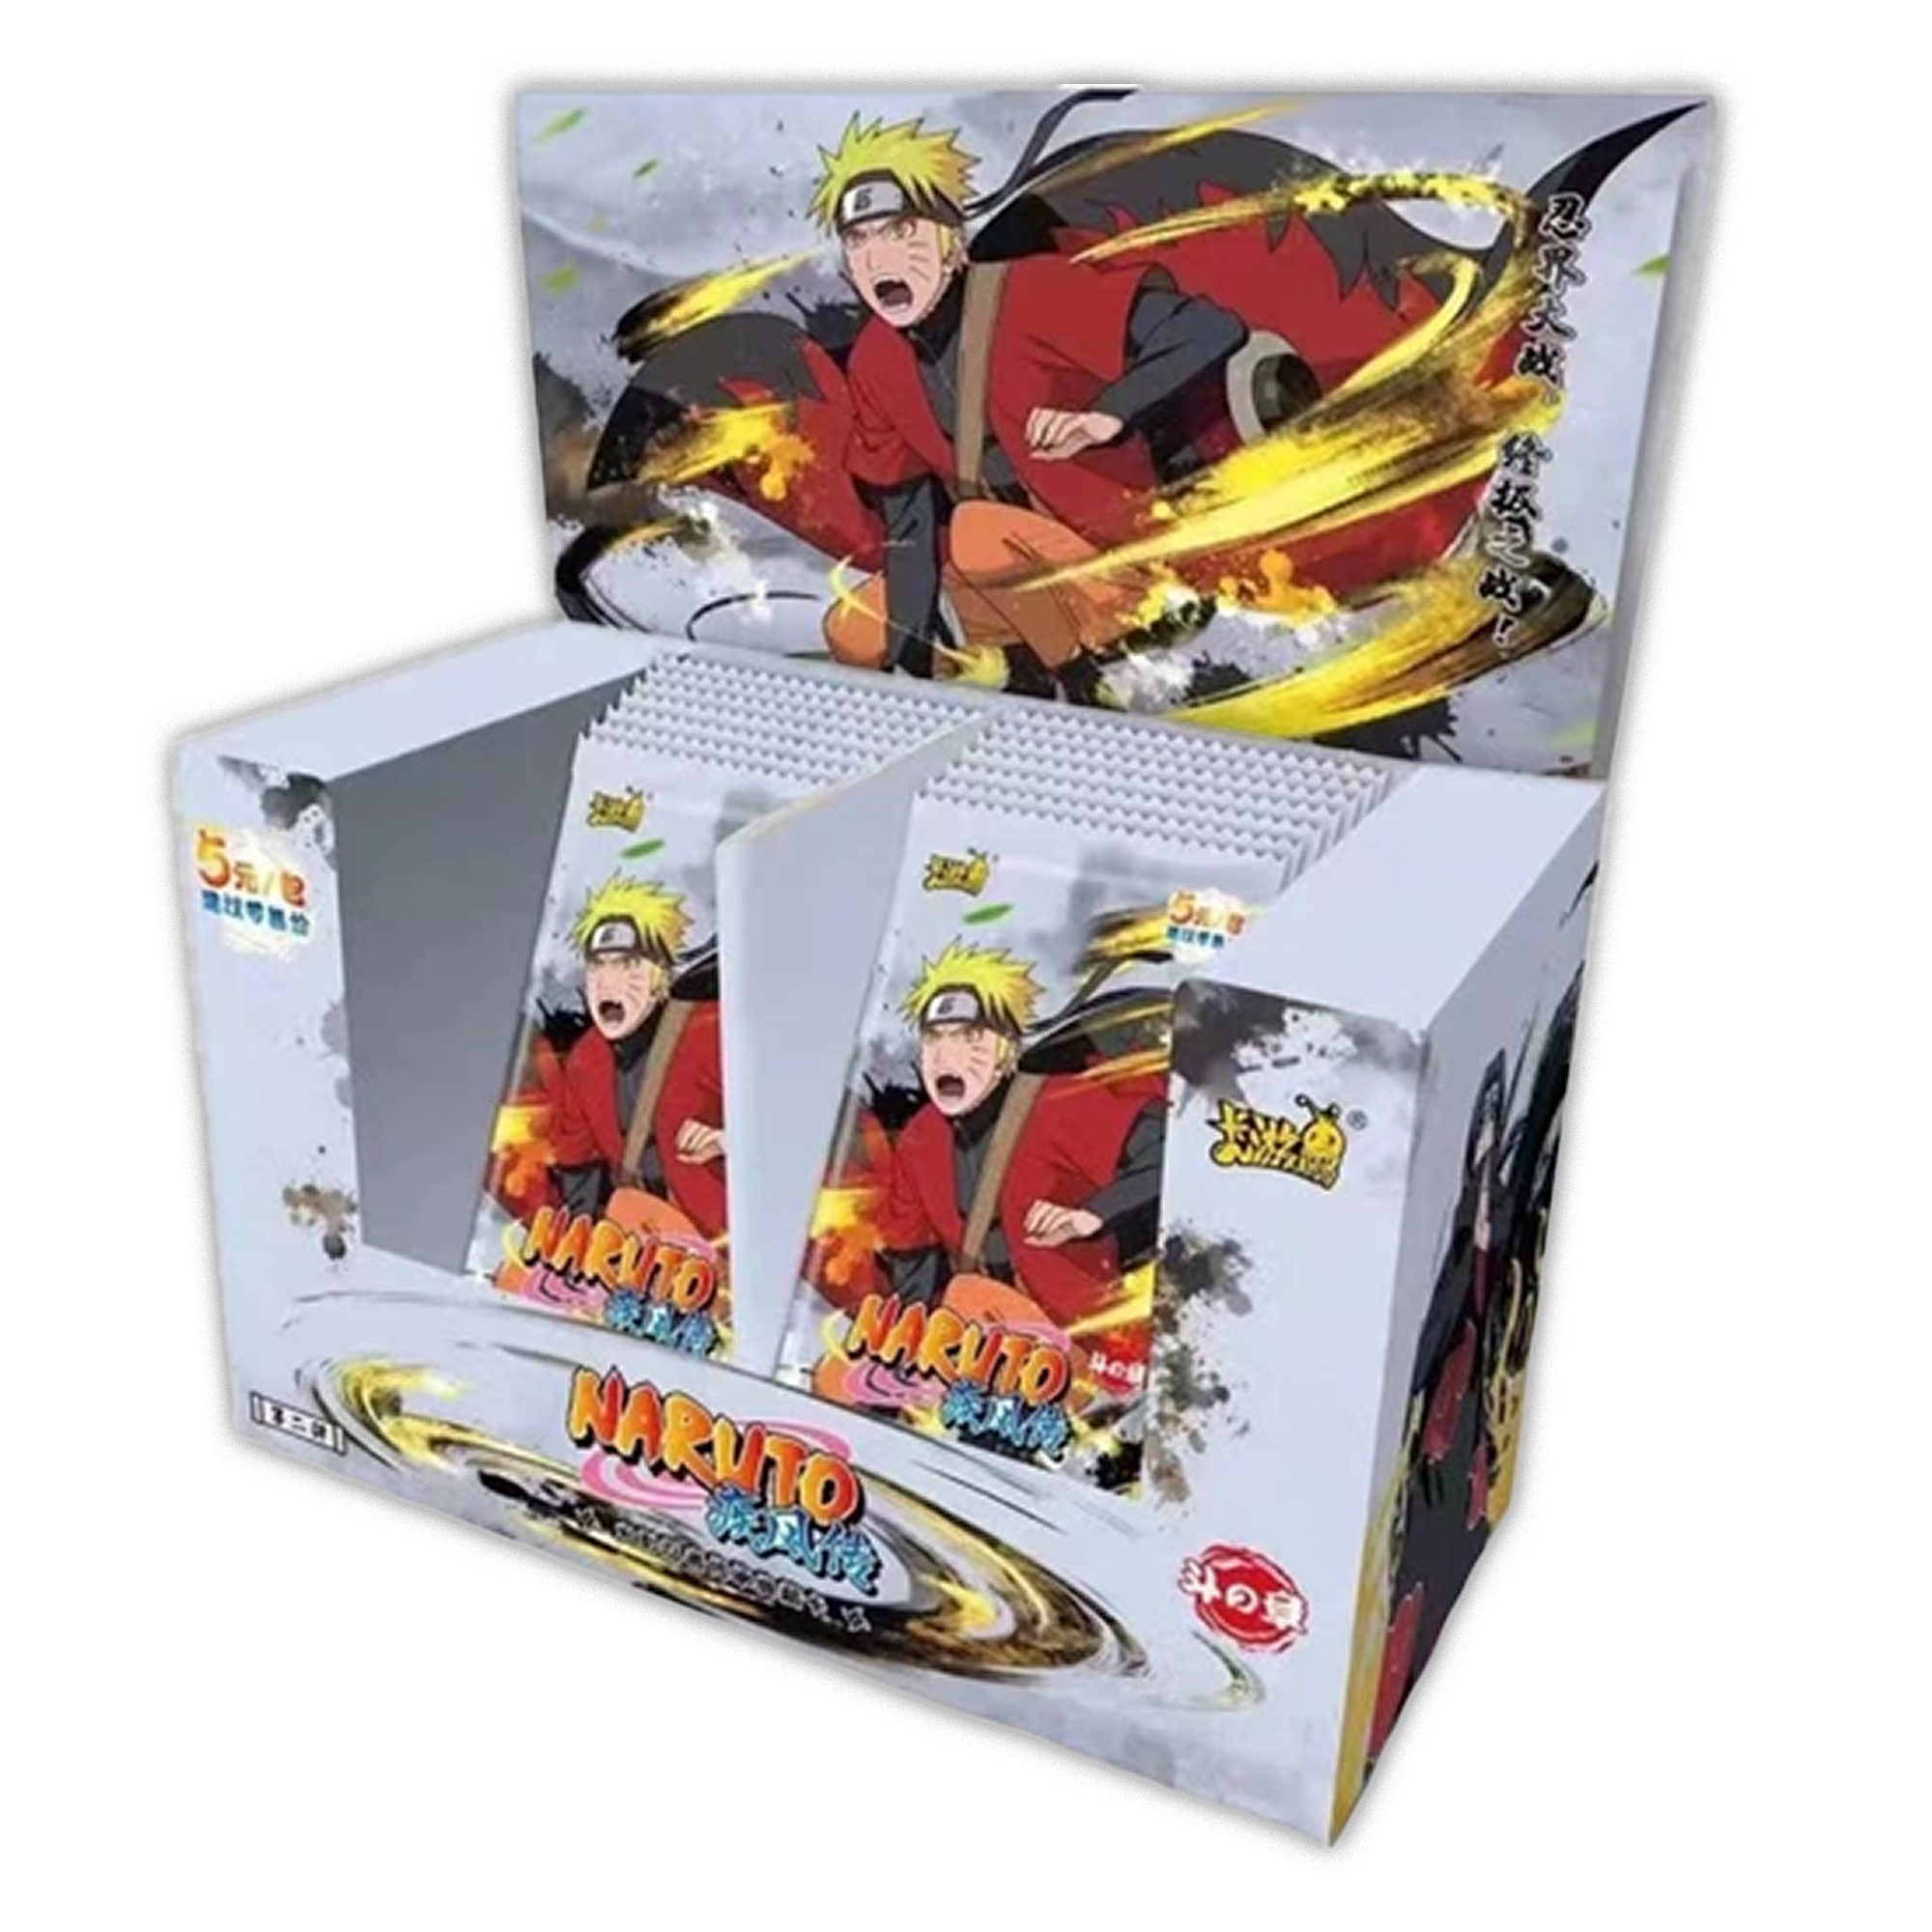 [SCELLE] Display 20 Boosters Naruto Kayou - Wave 2 Tiers 3 [CN]